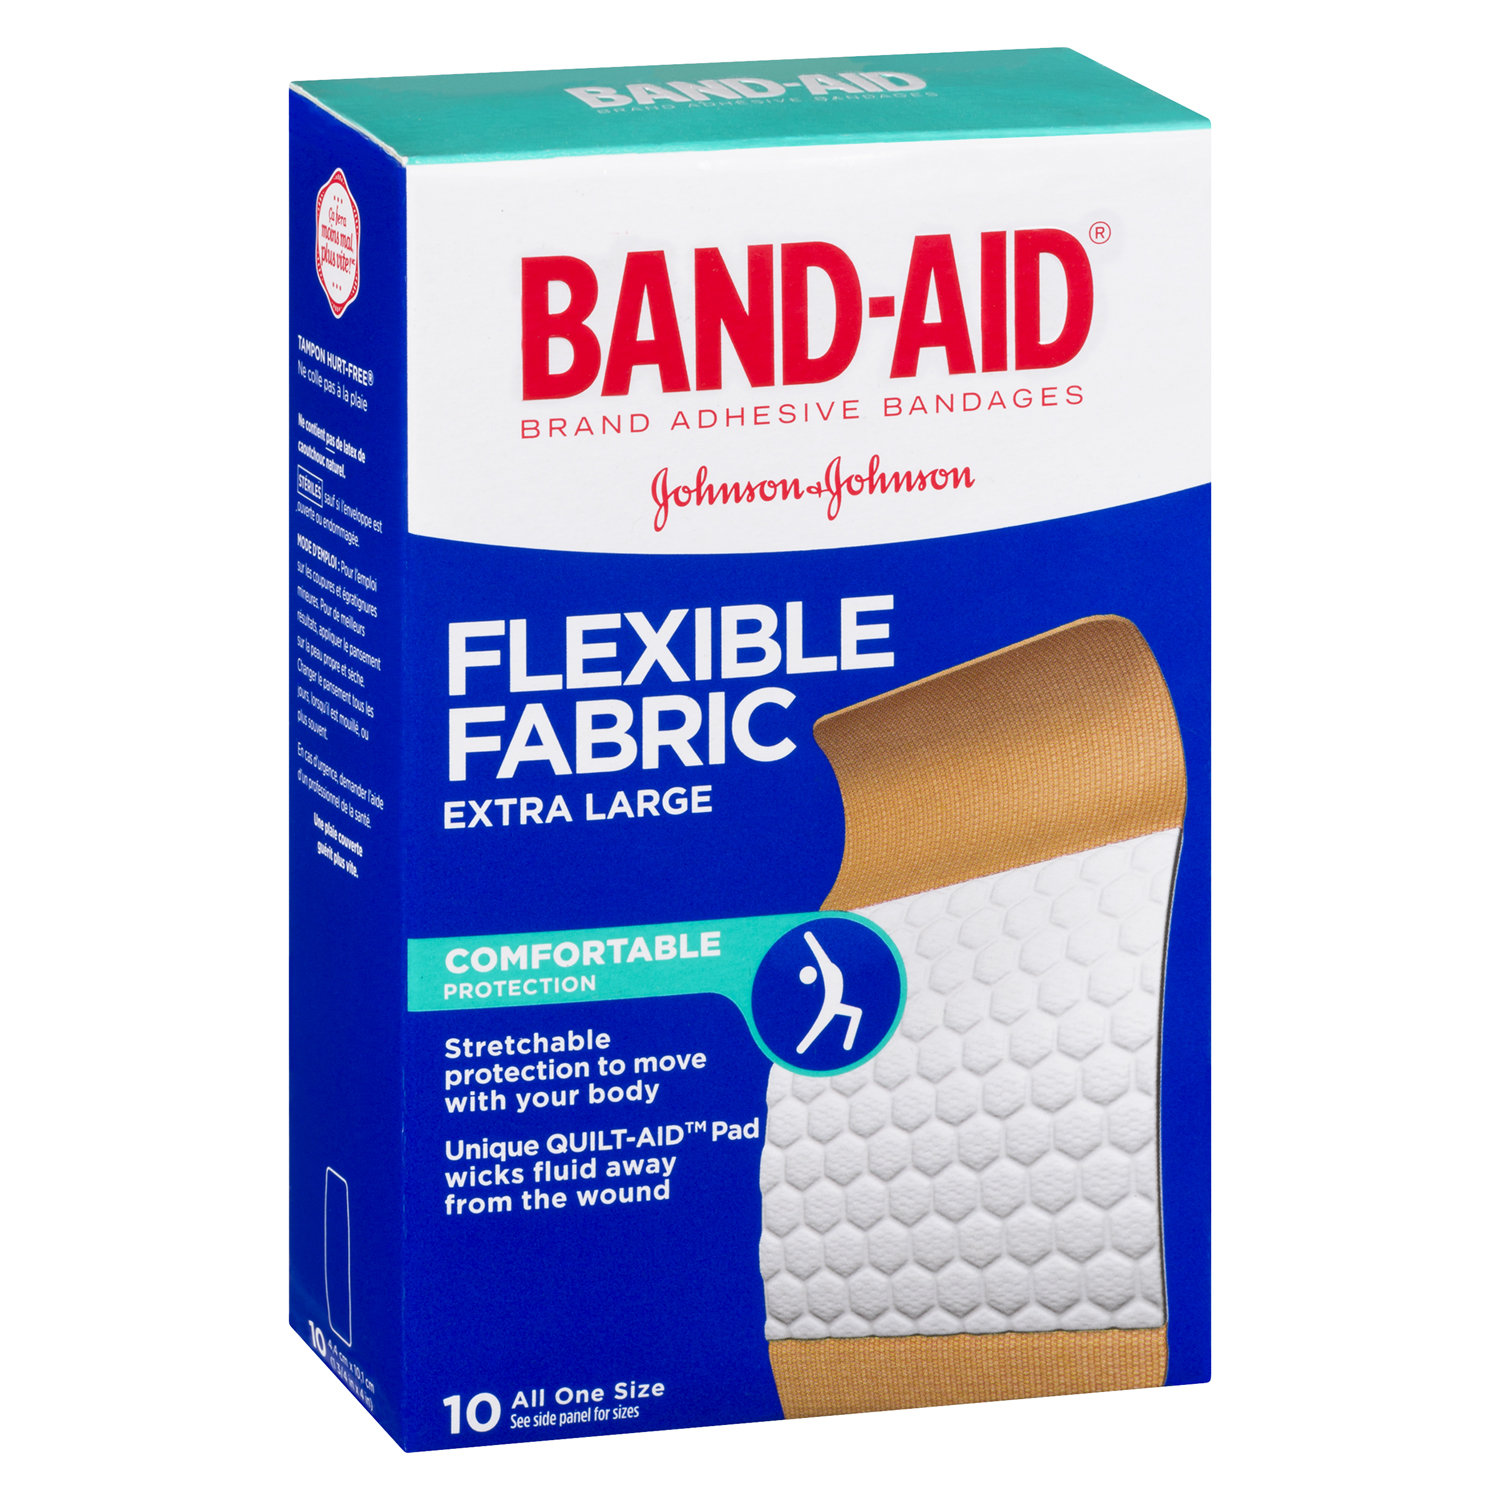 Bandages & Supplies - Save-On-Foods